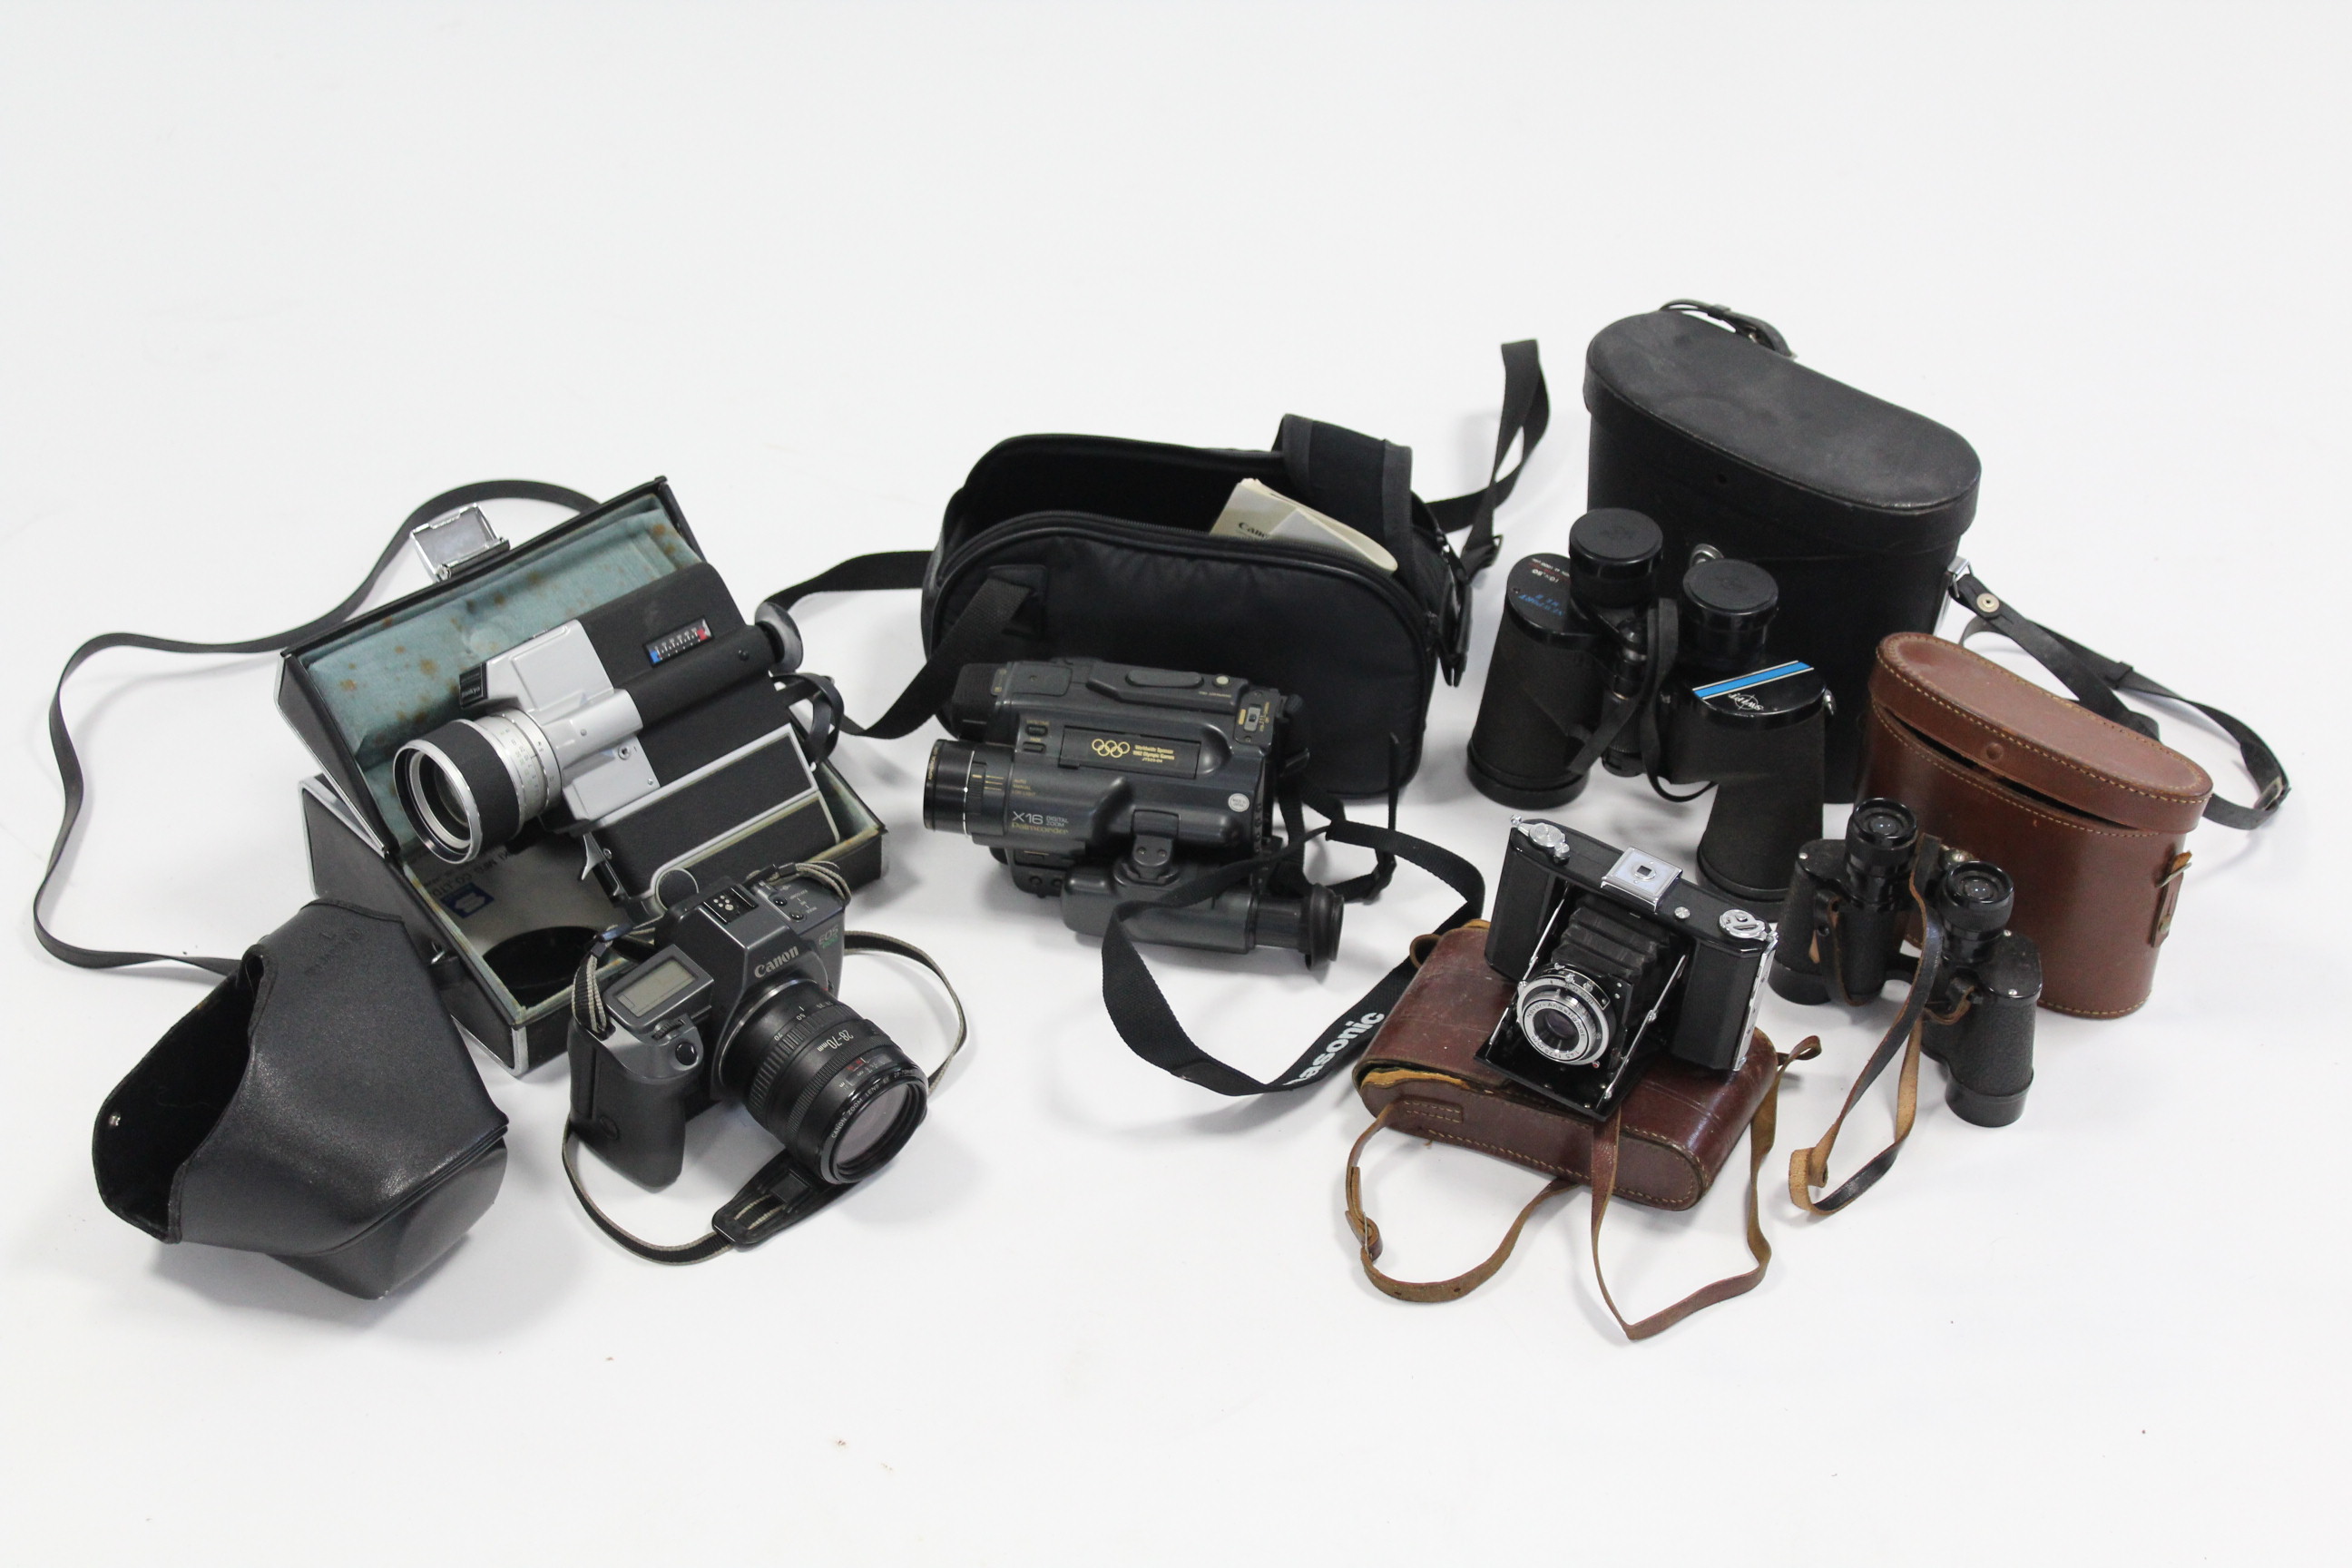 A Zeiss Ikon Nettar folding camera; a Canon “EOS 600” camera; two pairs of binoculars; & two movie